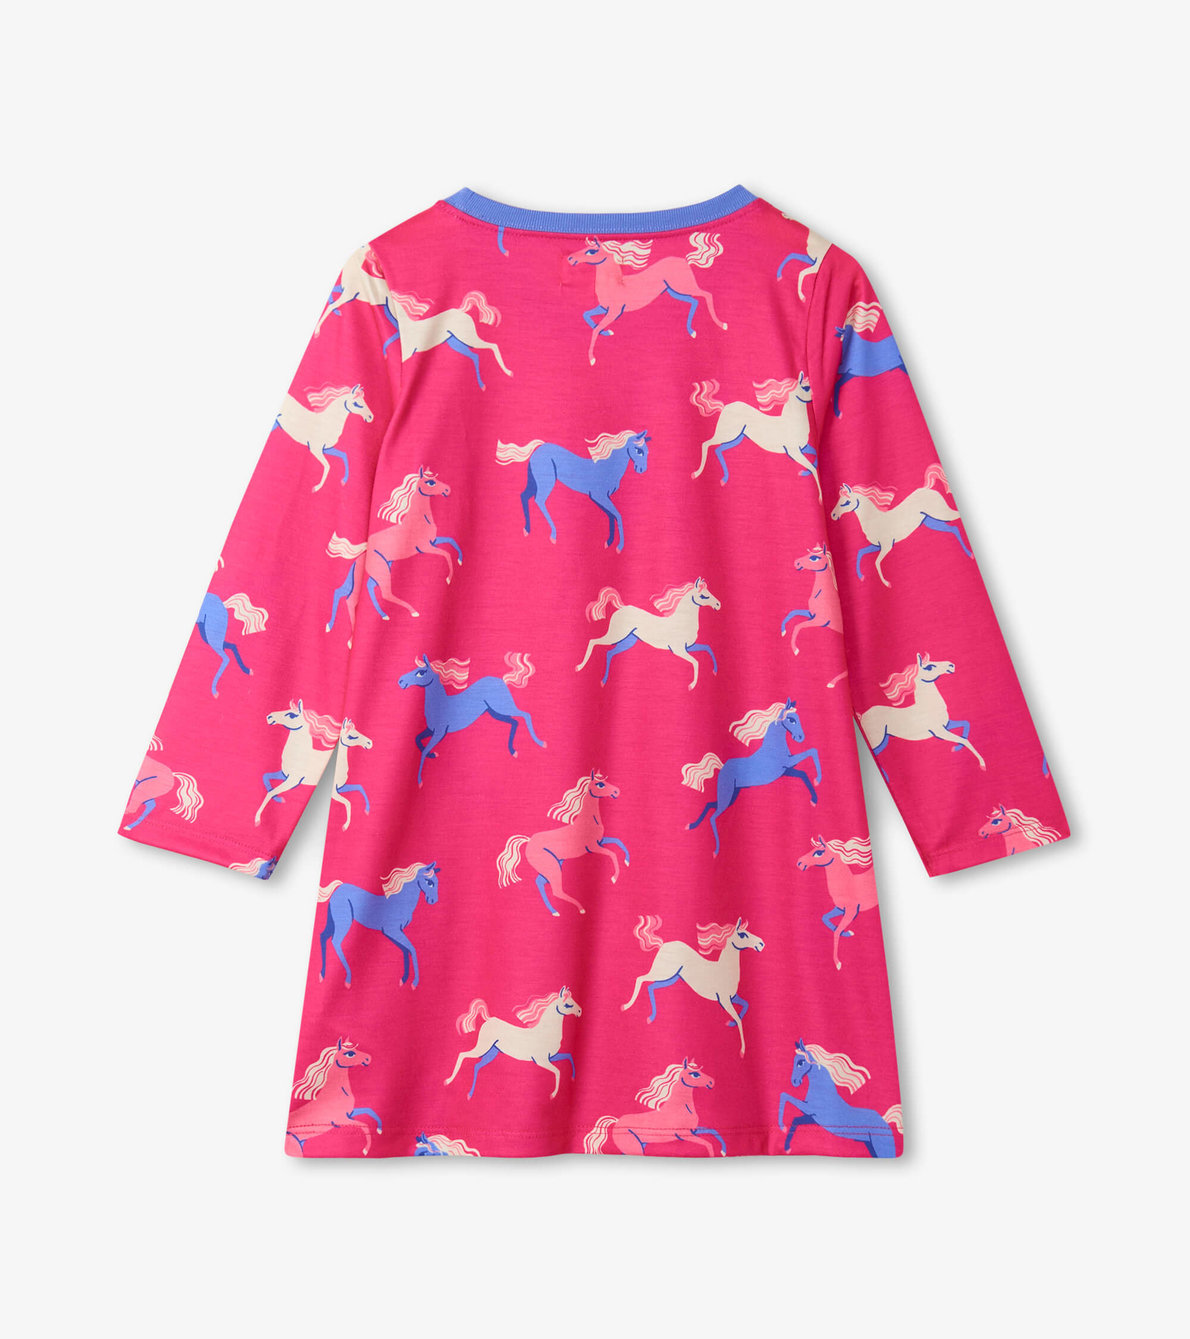 View larger image of Dreamland Horses Long Sleeve Girls Nightgown